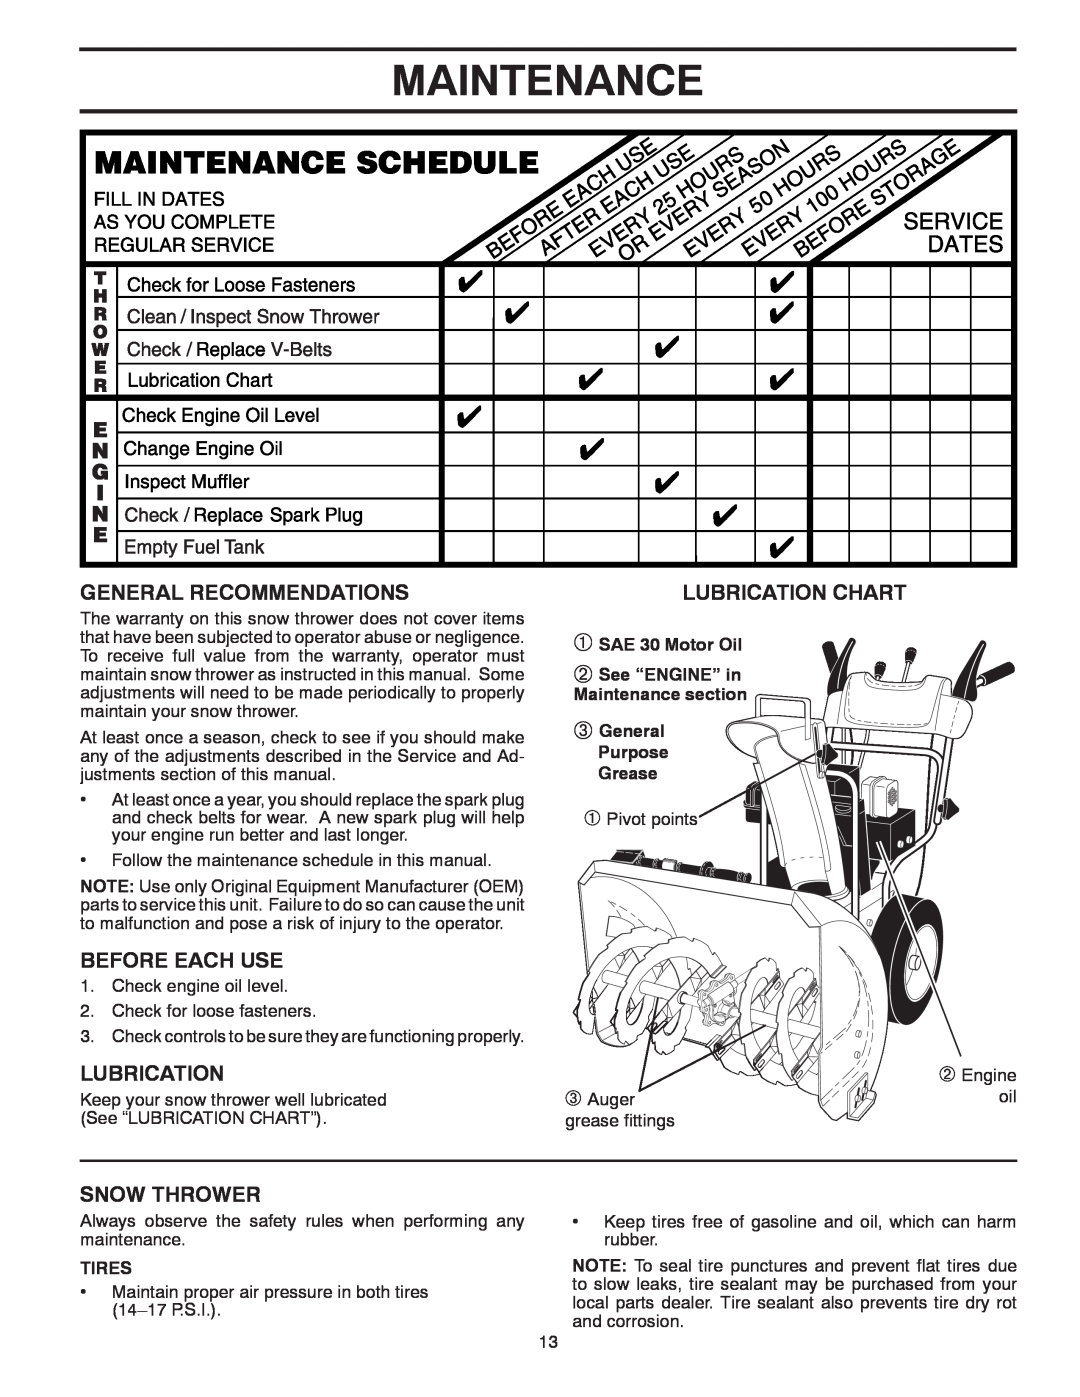 McCulloch 96192004001 Maintenance, General Recommendations, Before Each Use, Snow Thrower, Lubrication Chart, Tires 